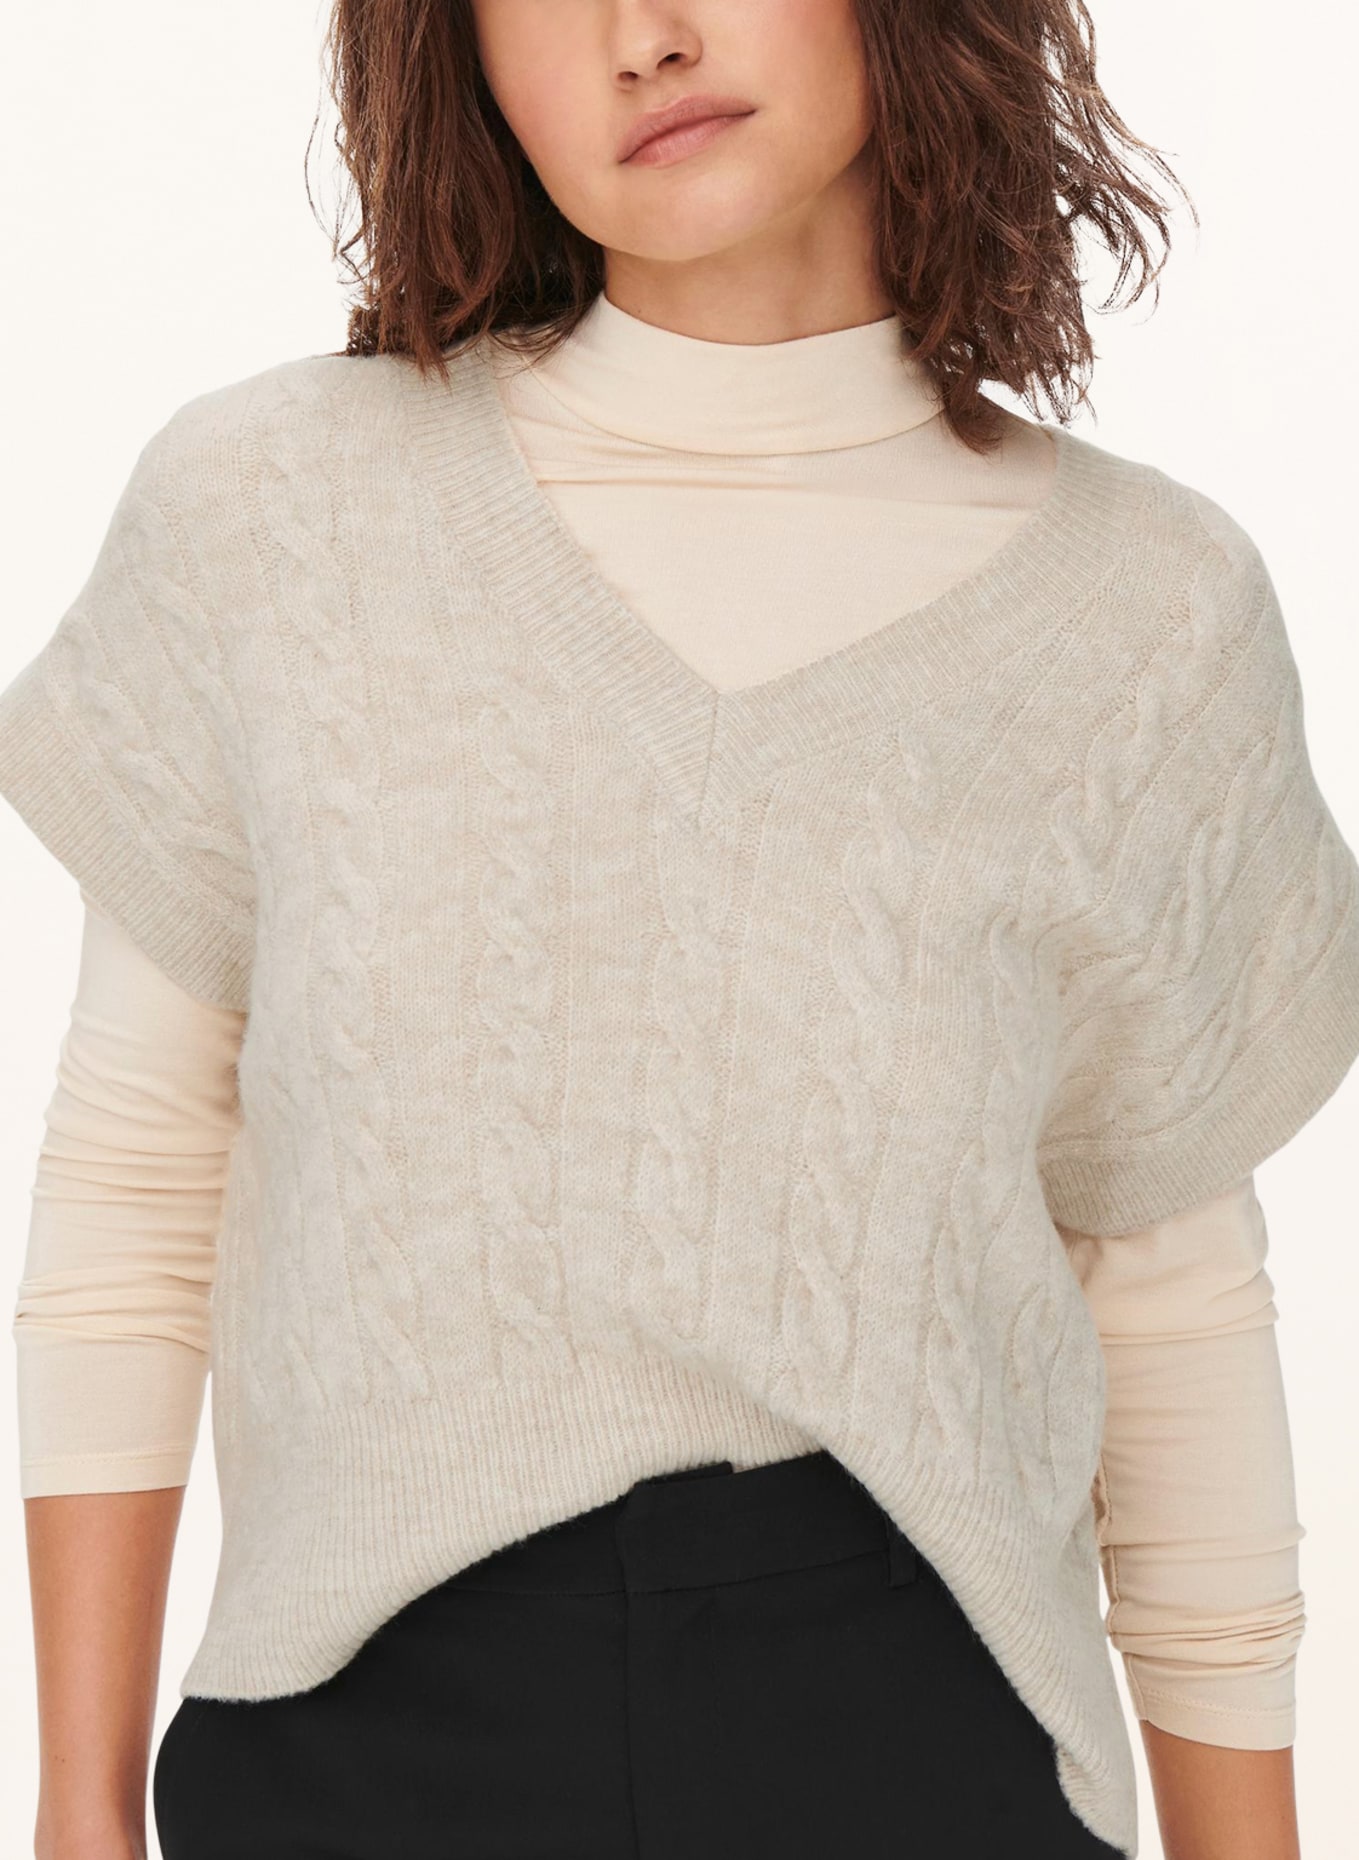 ONLY Sweater vest, Color: CREAM (Image 4)